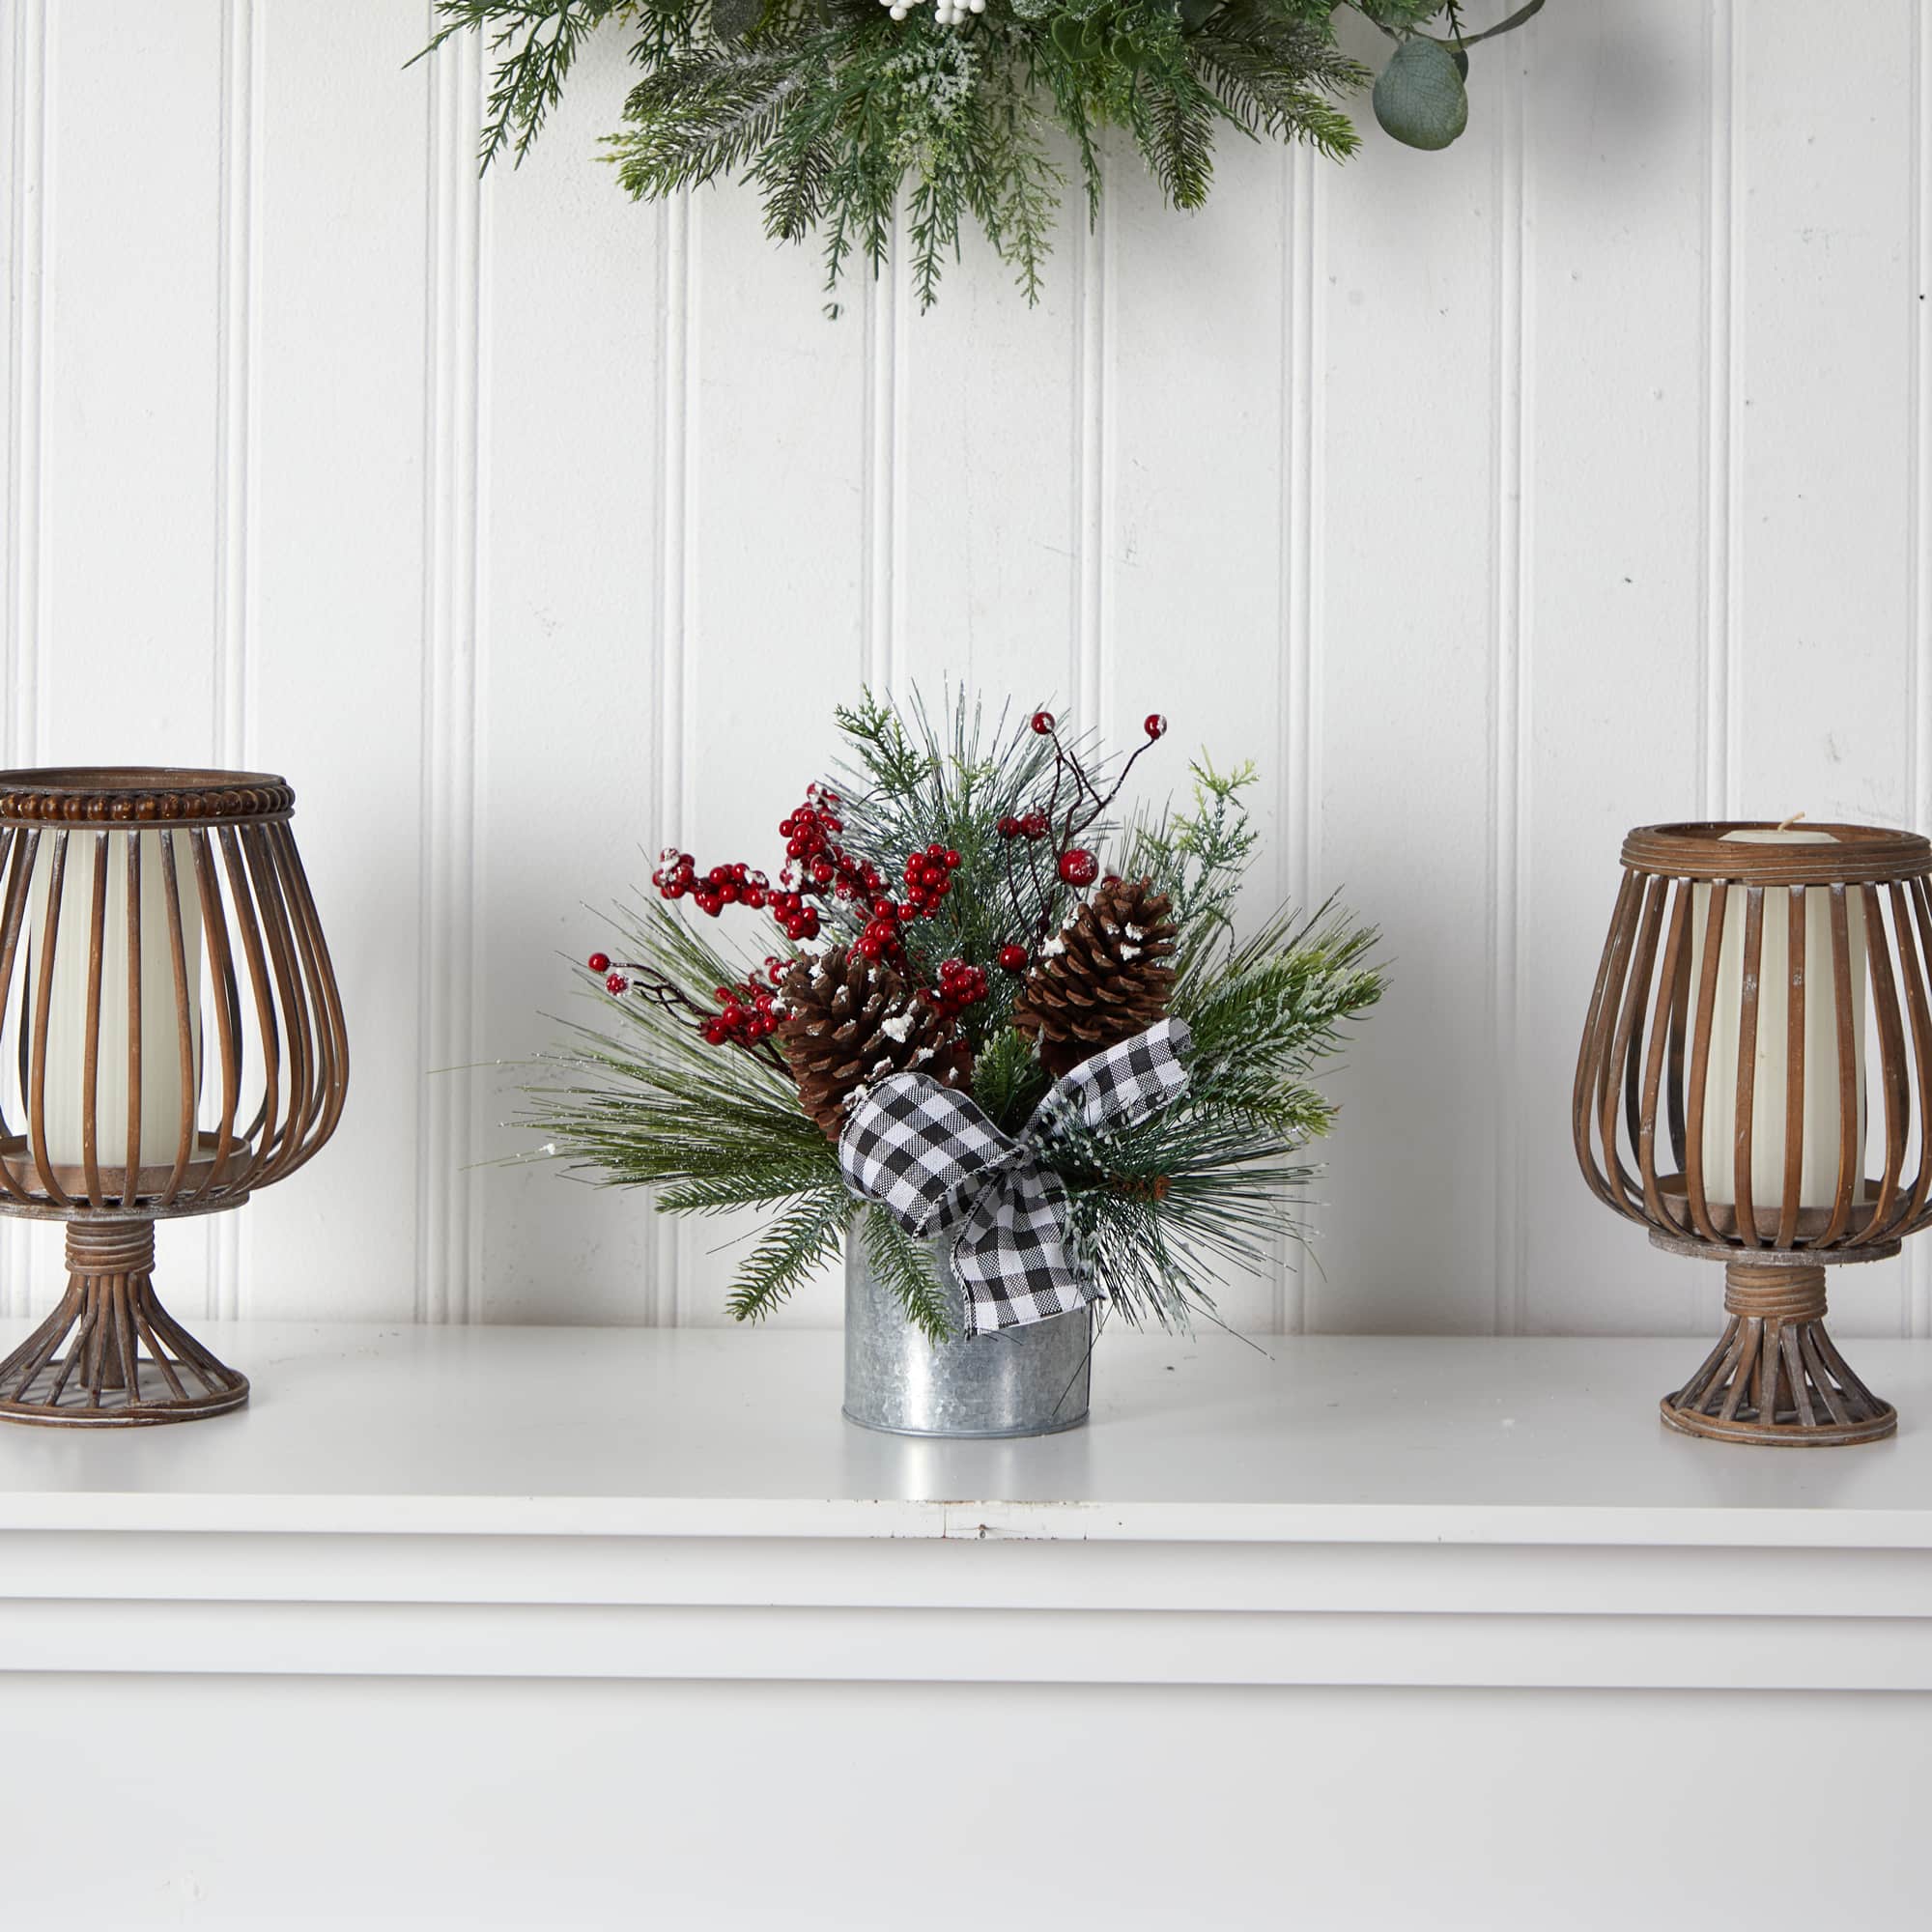 12&#x22; Frosted Pinecones &#x26; Berries Artificial Arrangement in Vase with Decorative Plaid Bow